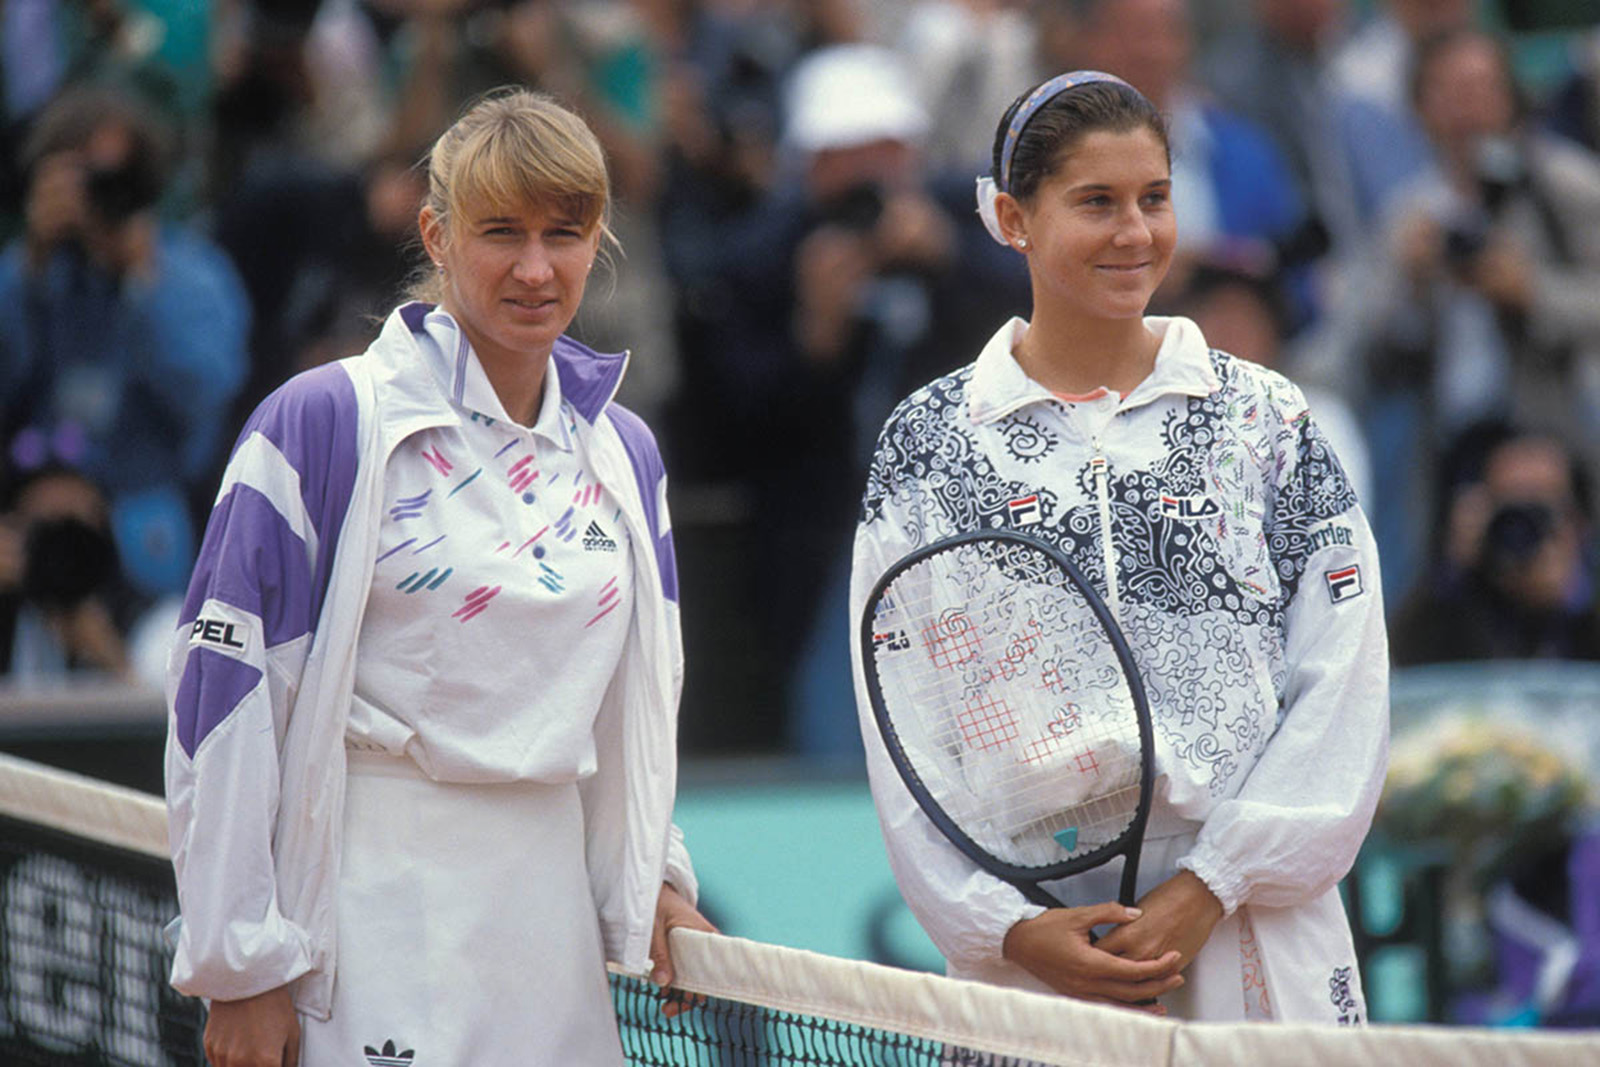 How True Superhero Monica Seles Fought Her Way Back To The Top